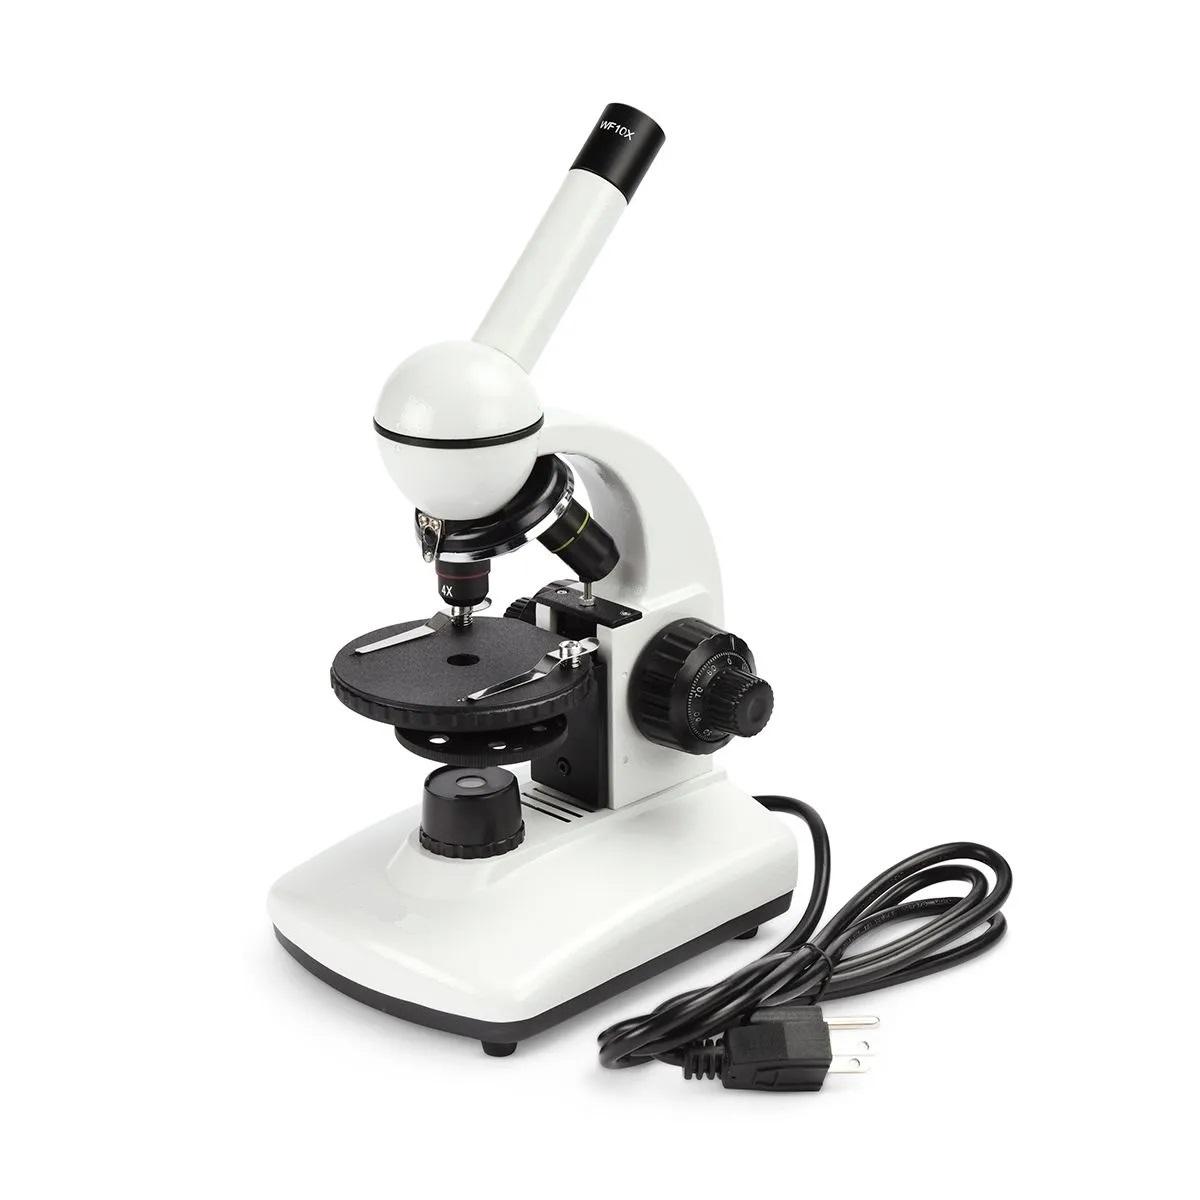 Co-Axial Elementary Compound Microscope